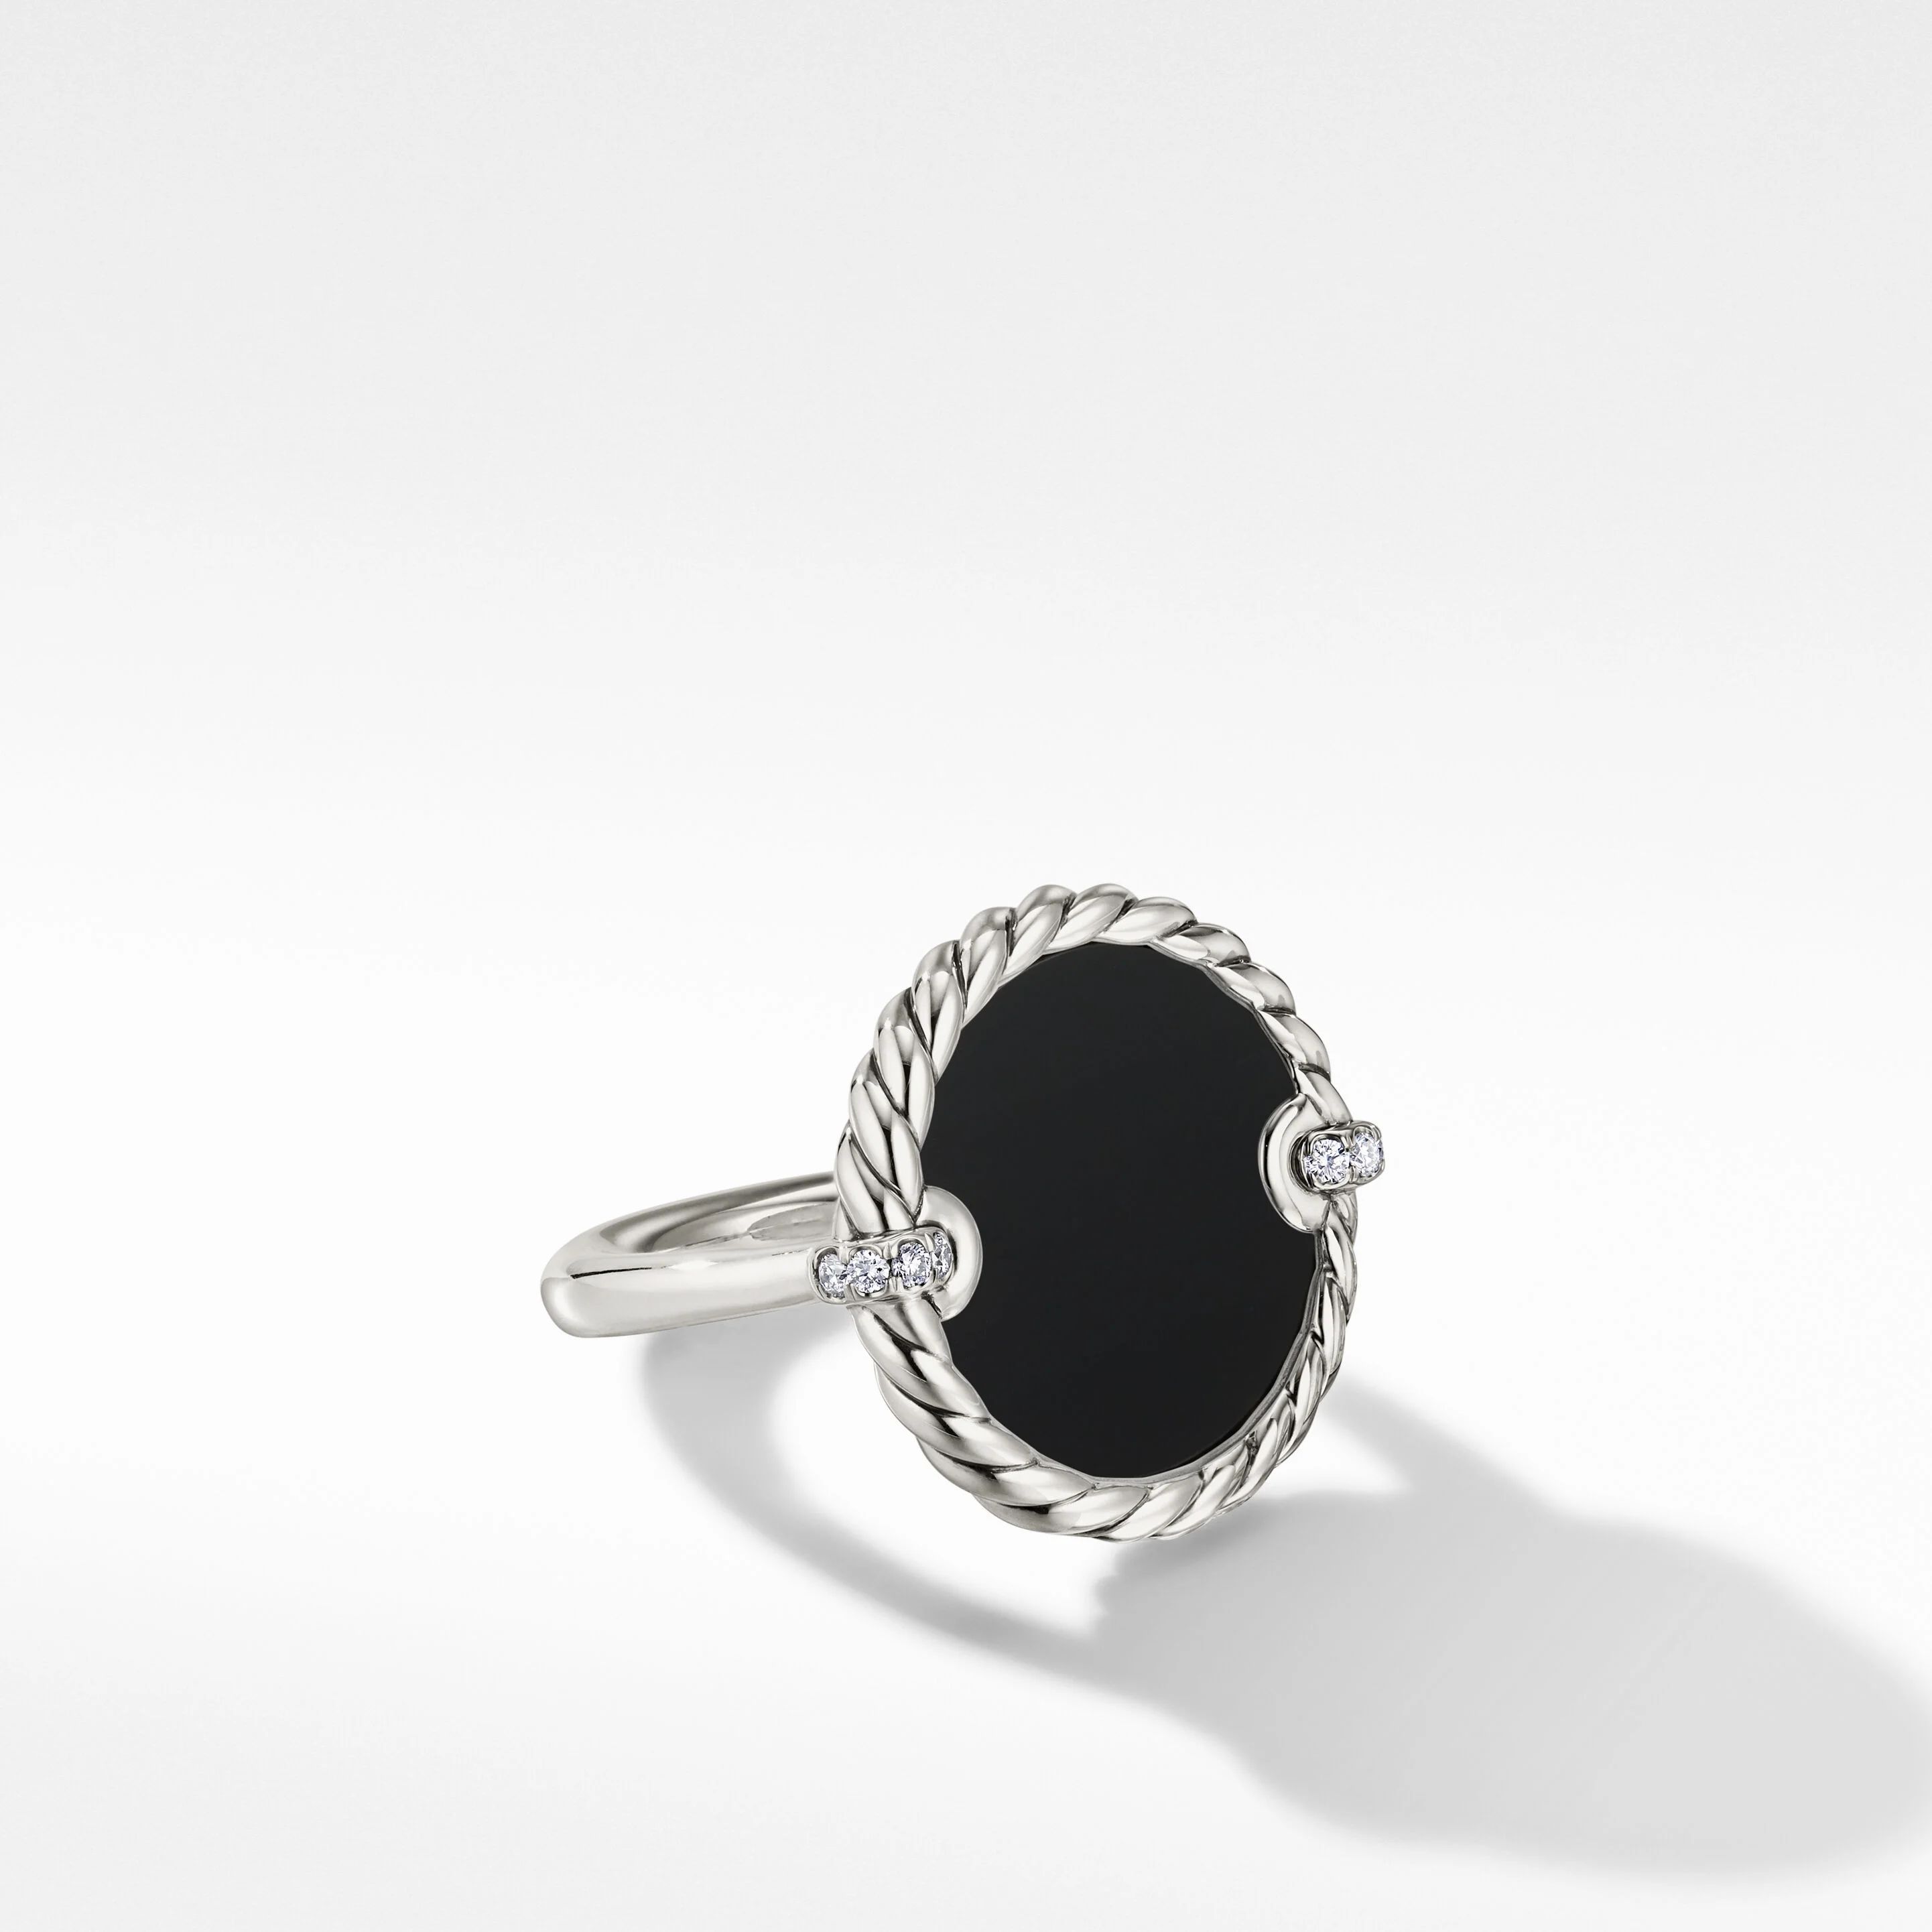 DY Elements® Ring in Sterling Silver with Black Onyx and Pavé Diamonds | David Yurman